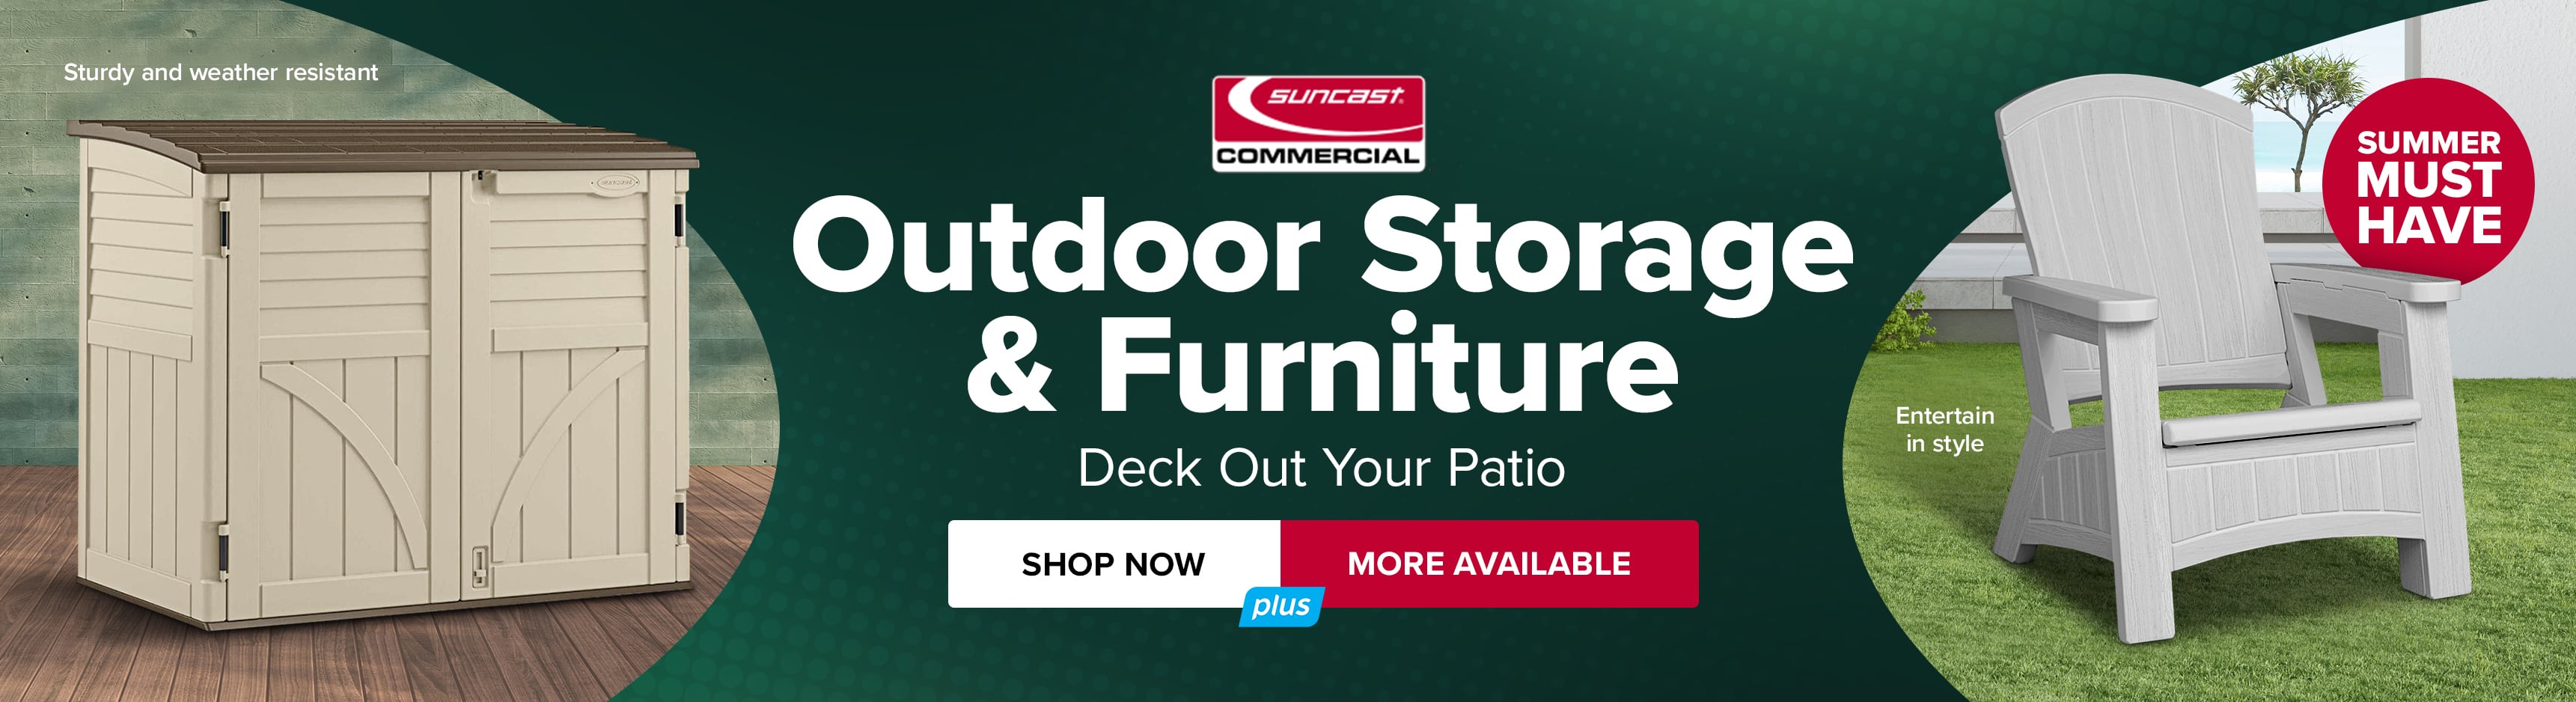 Suncast Corporation Outdoor Storage and Furniture. Deck Out Your Patio. Shop Now. More Available.